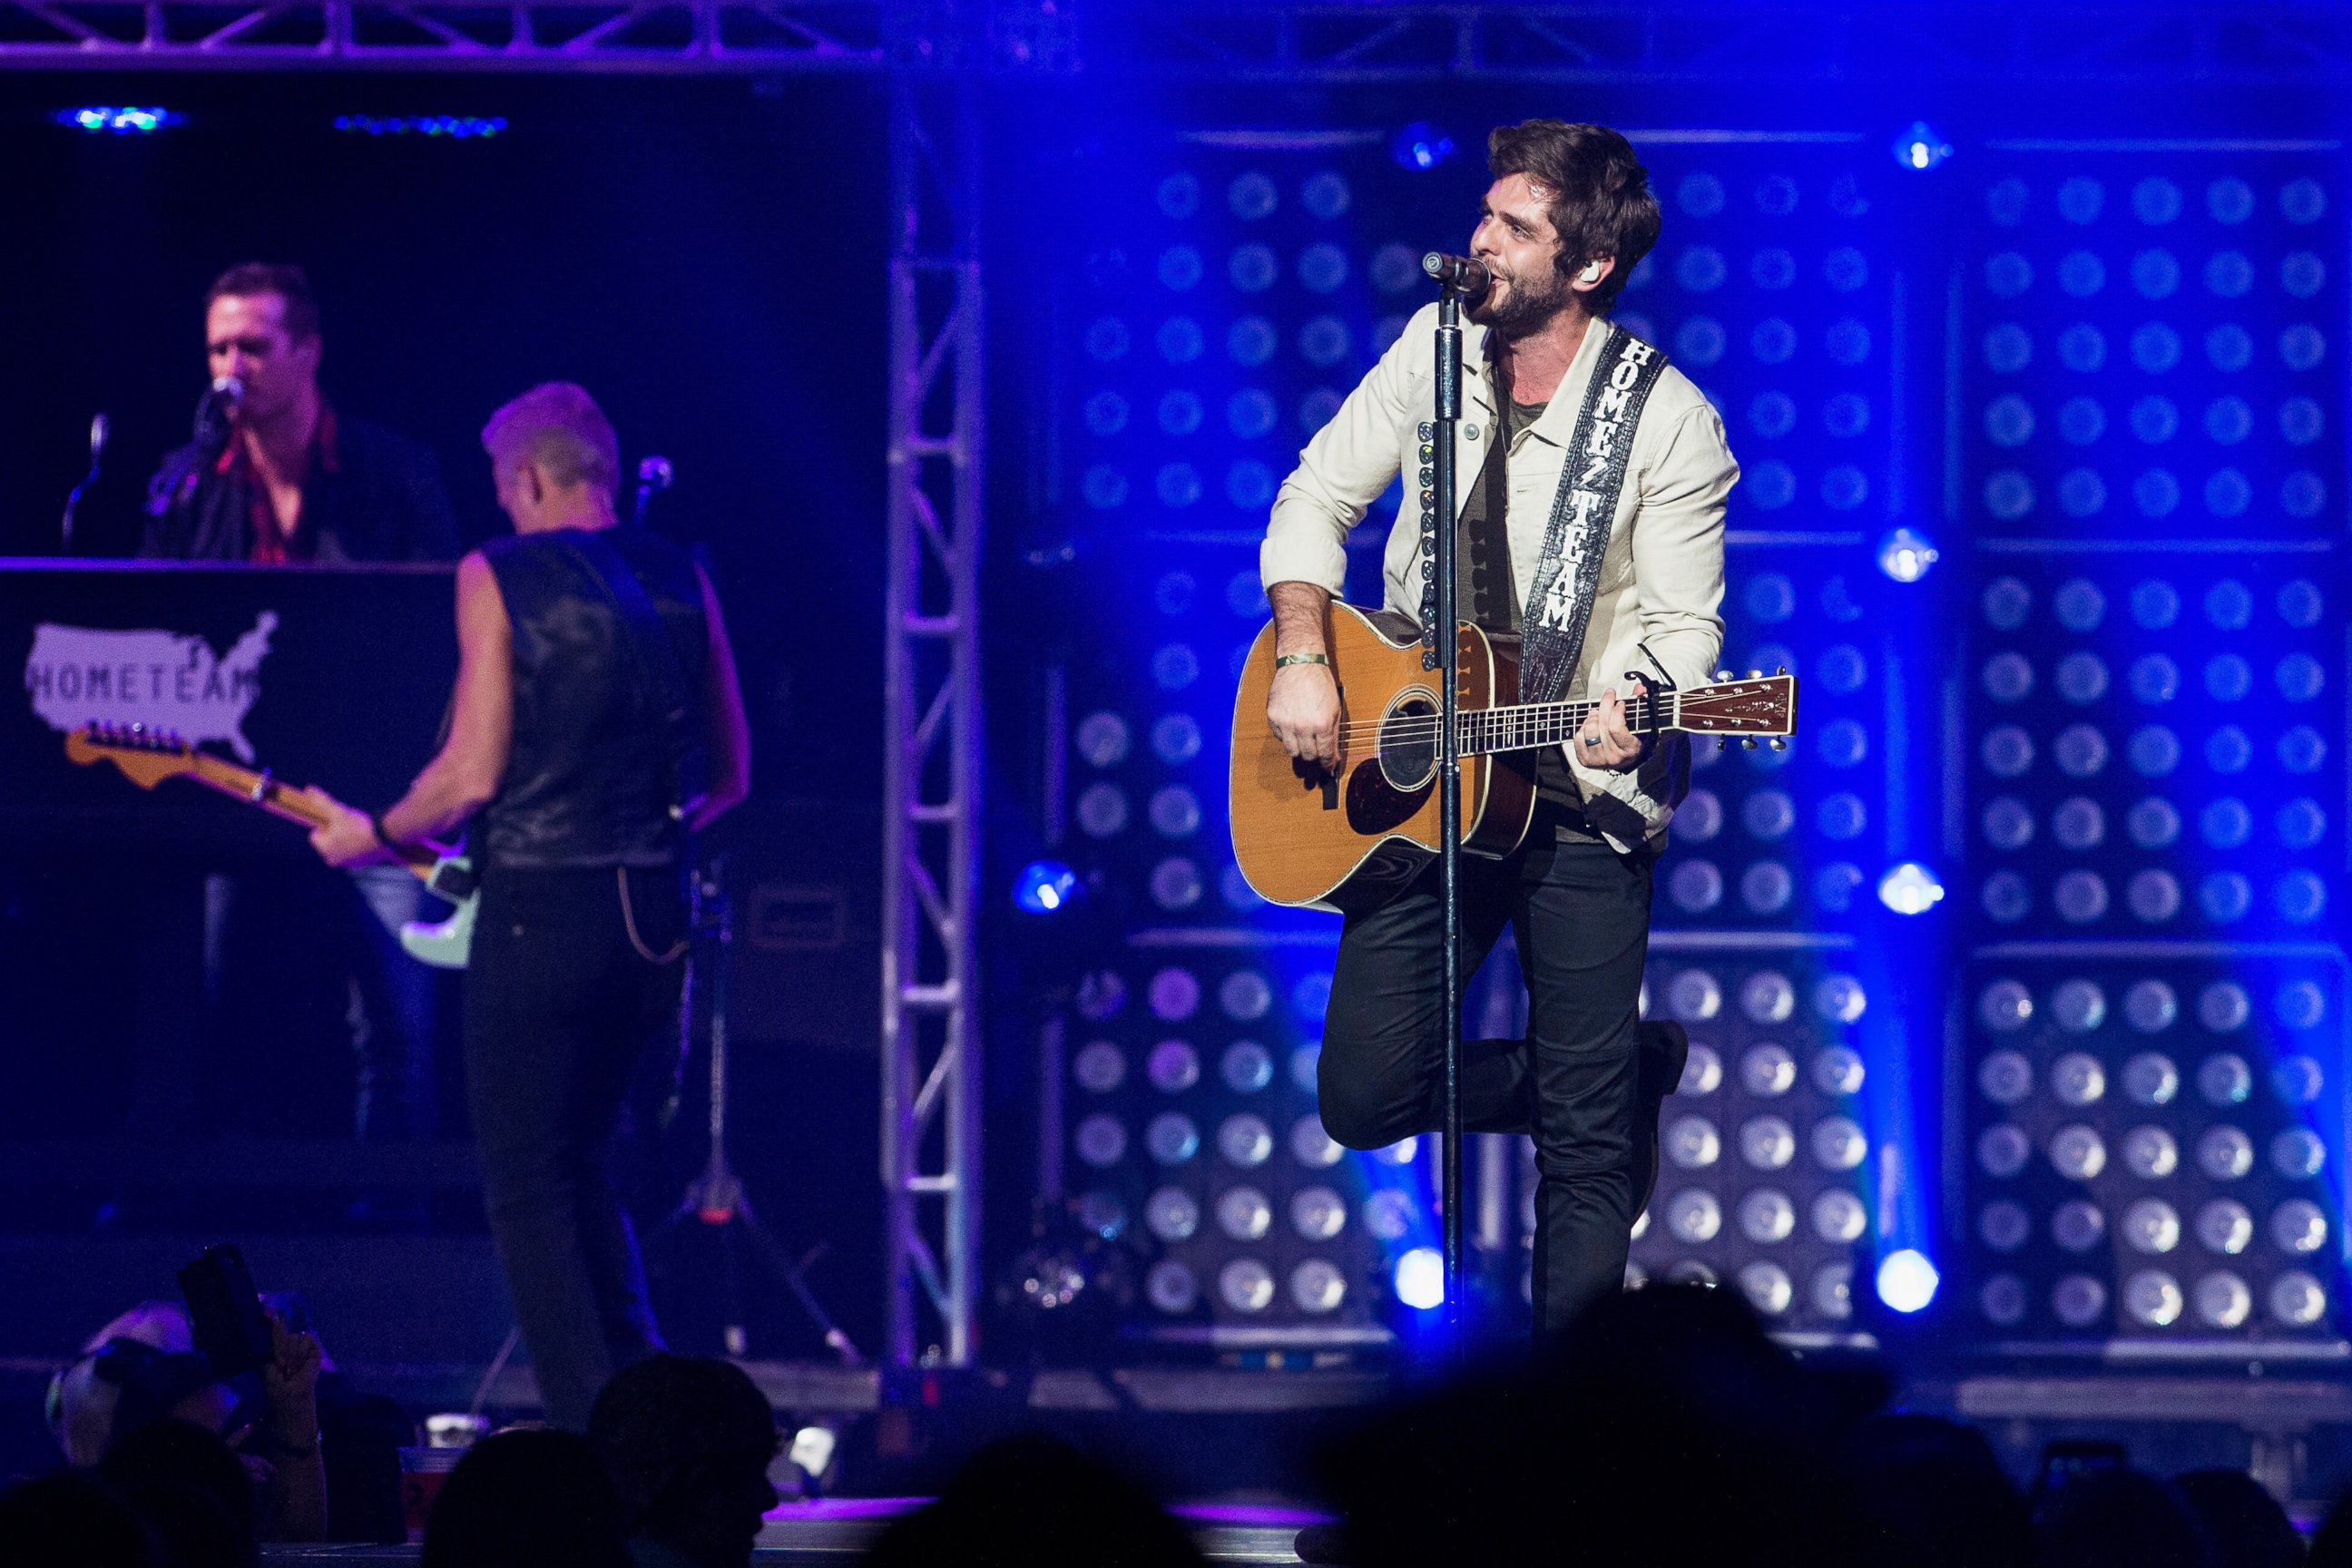 PHOTO: Thomas Rhett performs at Smoothie King Center on Oct. 16, 2015 in New Orleans.